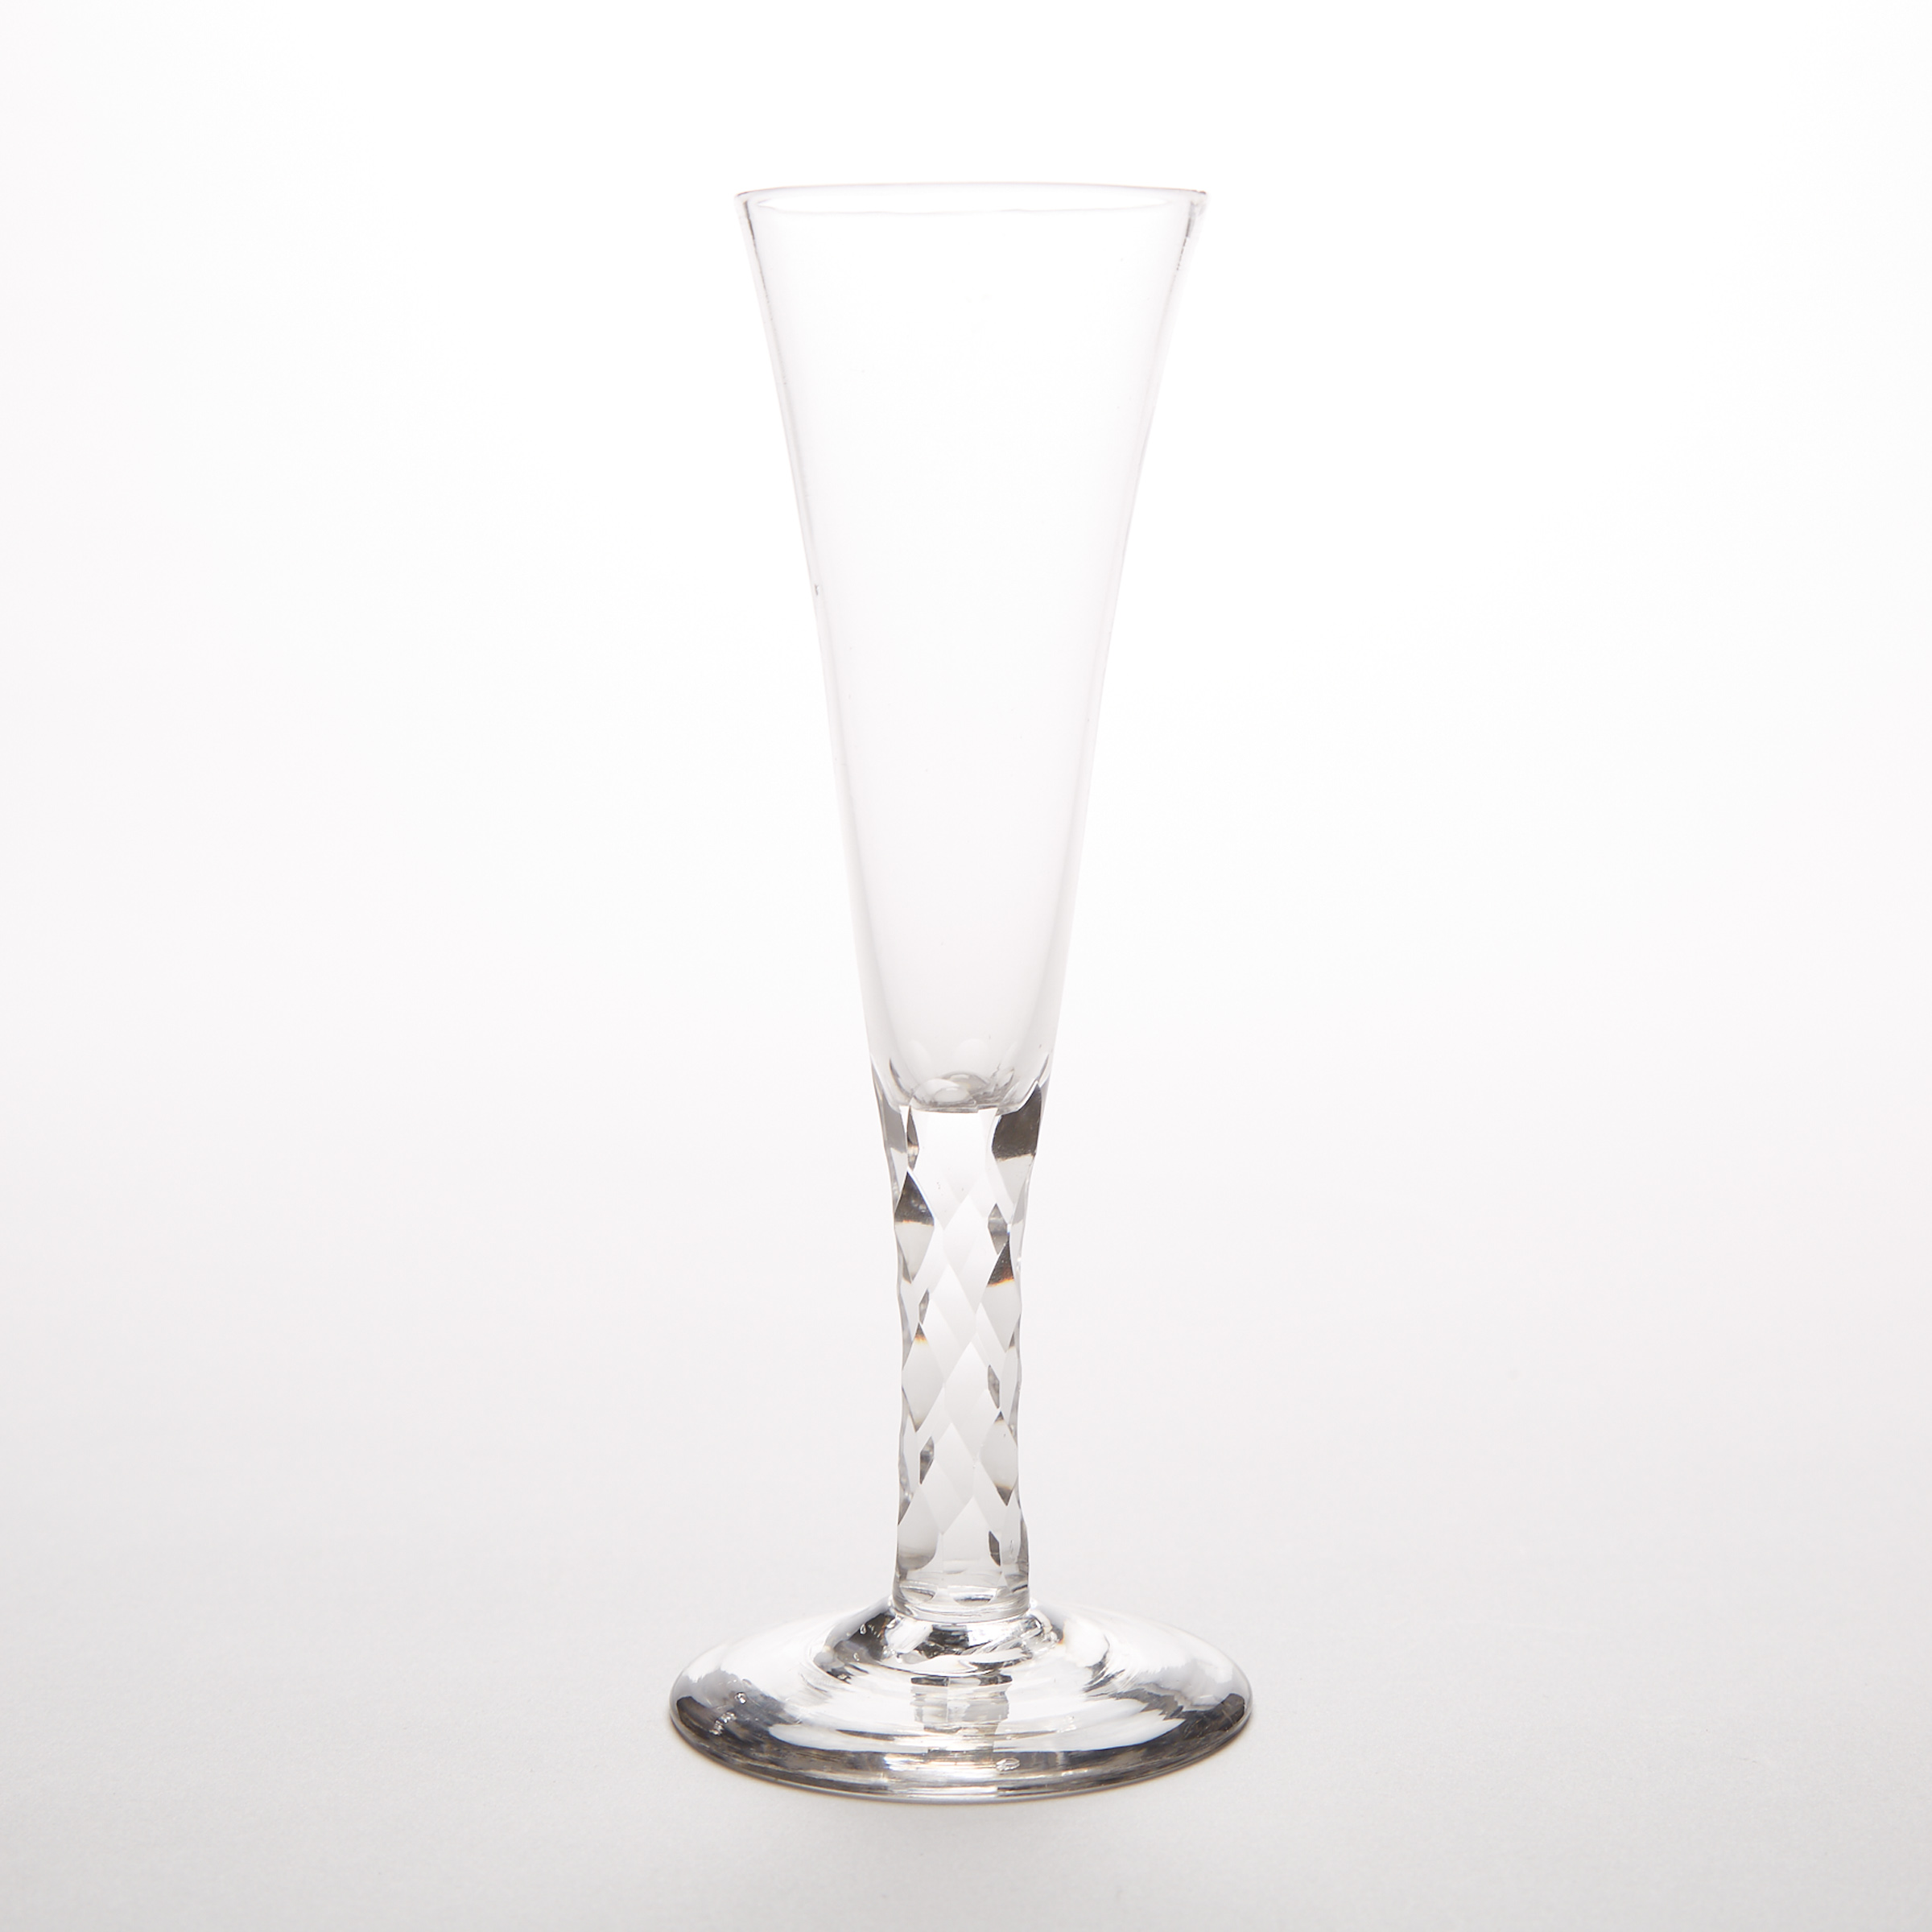 English Faceted Stemmed Flute Wine Glass, late 18th century